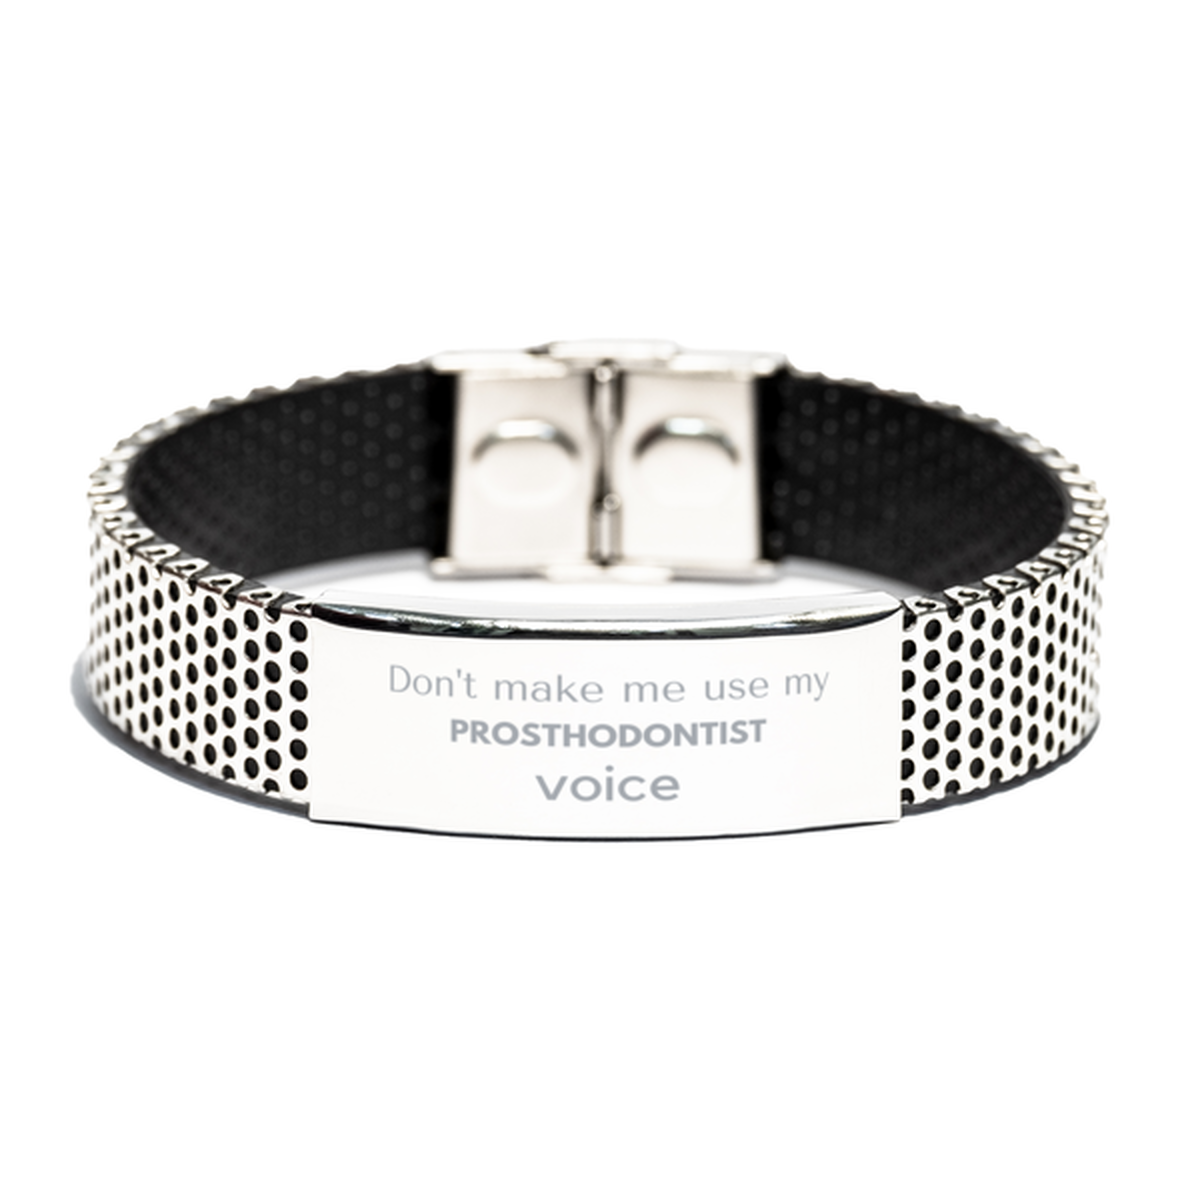 Don't make me use my Prosthodontist voice, Sarcasm Prosthodontist Gifts, Christmas Prosthodontist Stainless Steel Bracelet Birthday Unique Gifts For Prosthodontist Coworkers, Men, Women, Colleague, Friends